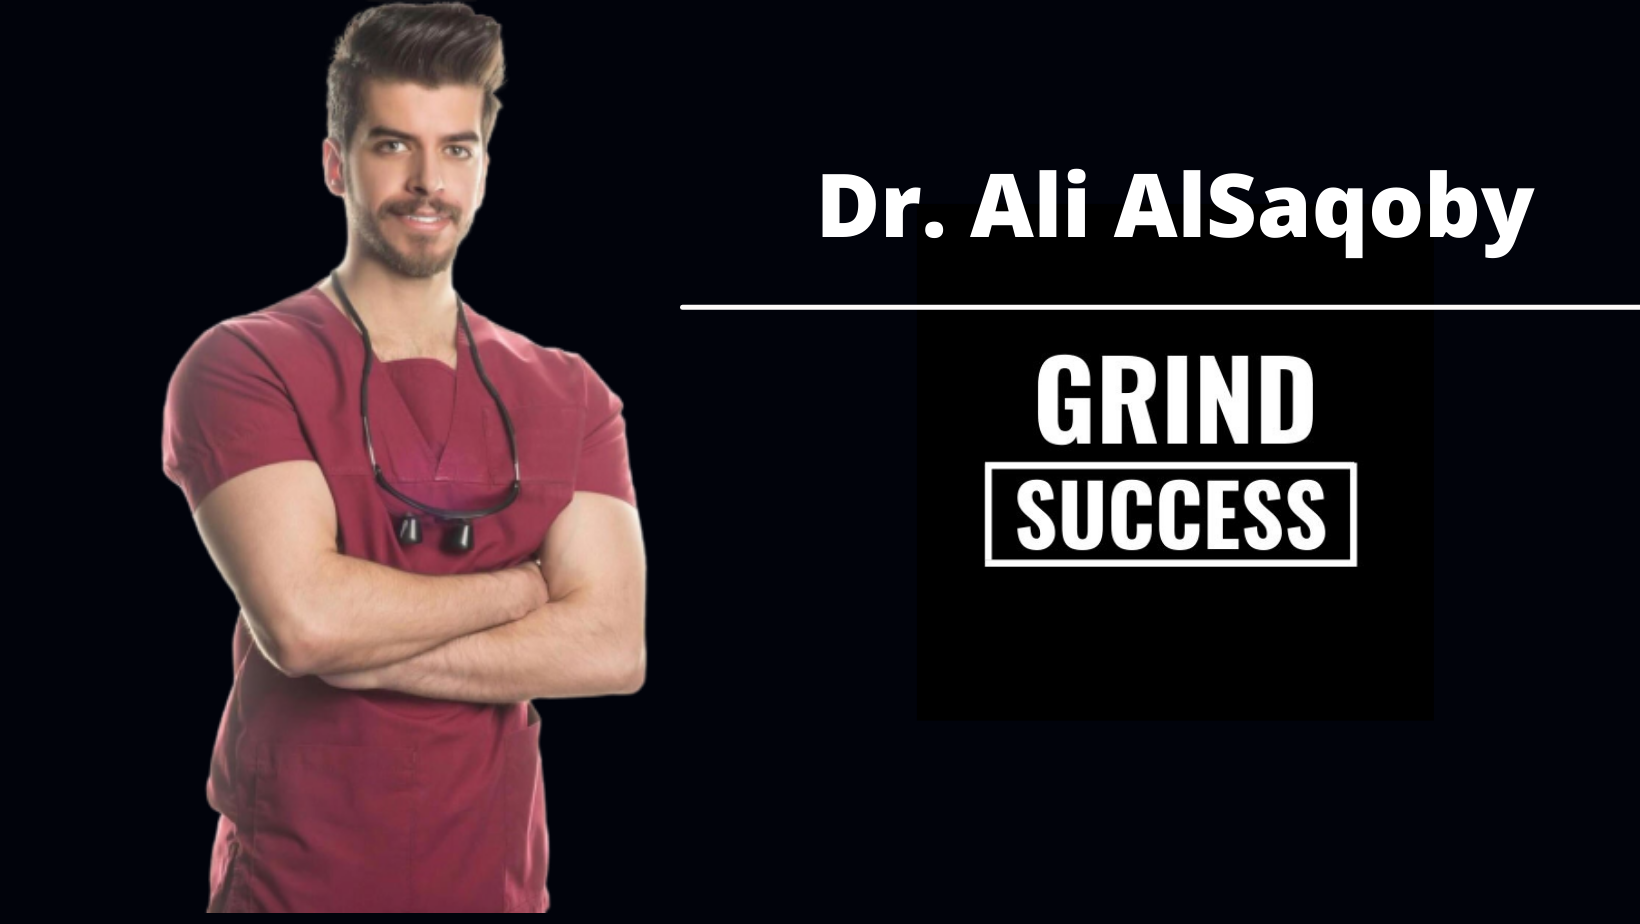 Celebrated Dental Doctor: Dr. Ali AlSaqoby Reveals his Journey of Tremendous Success to the Topmost!